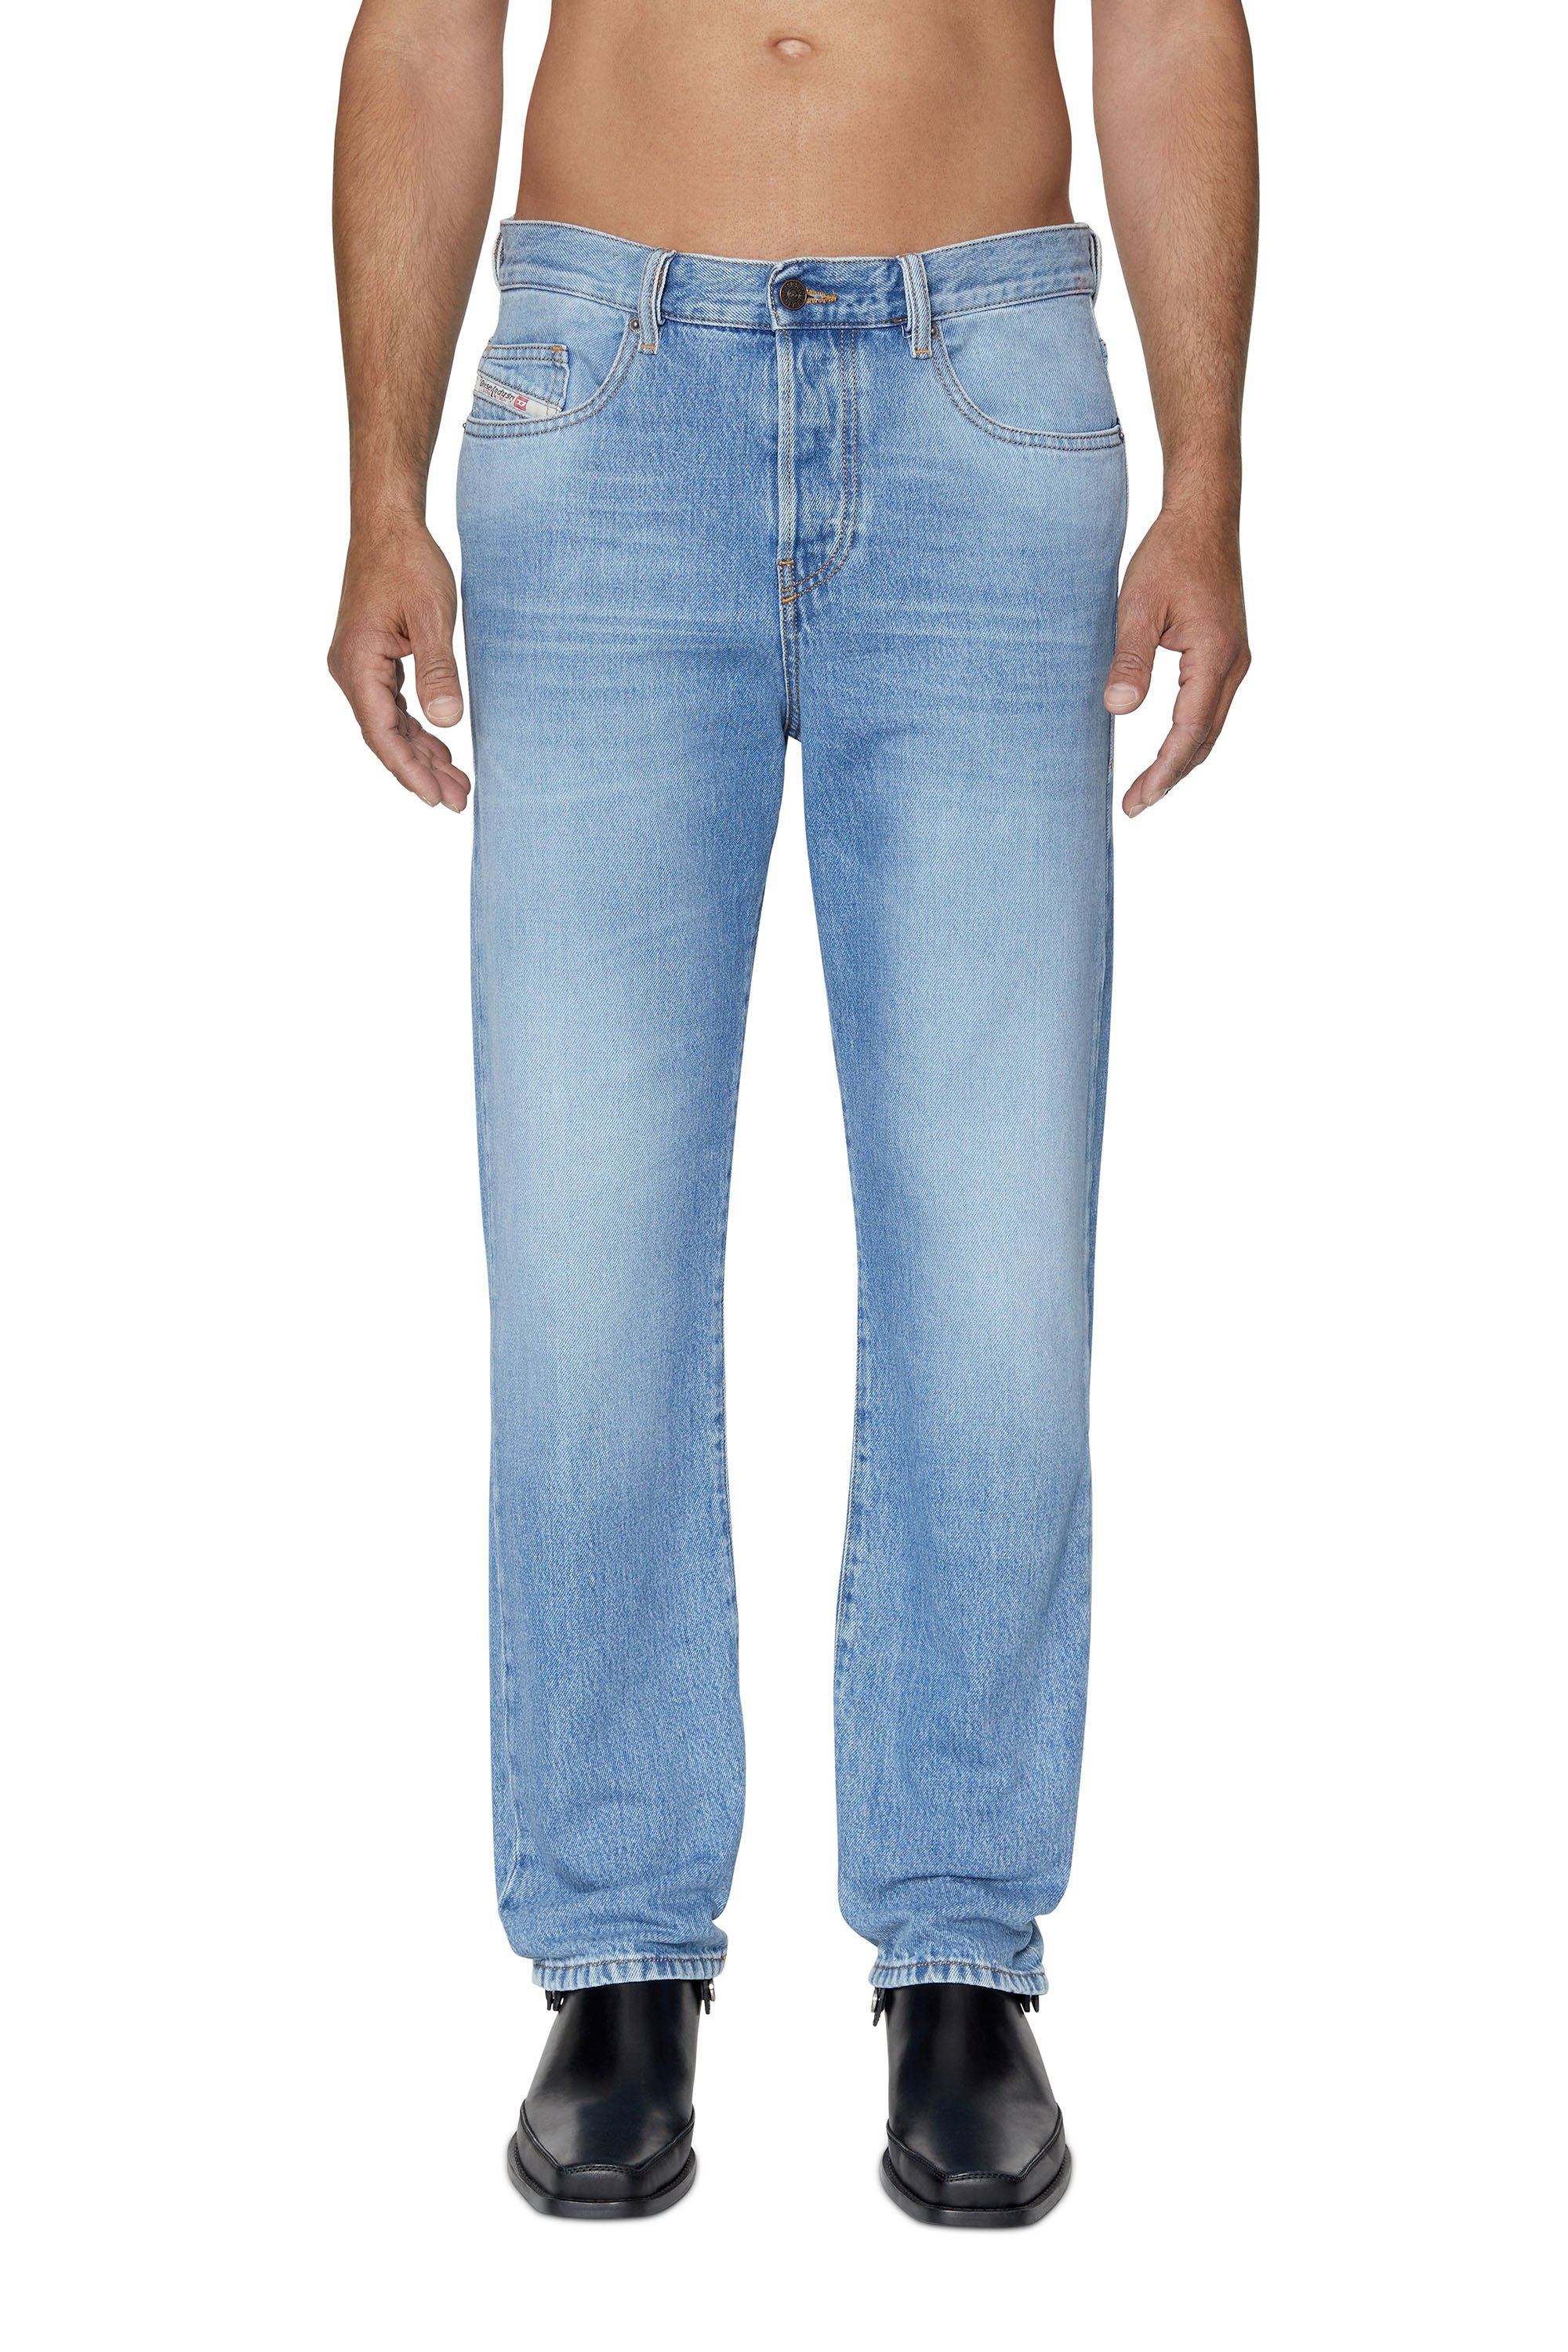 Diesel Industry Jeans flare bleu style d\u00e9contract\u00e9 Mode Jeans Jeans flare 